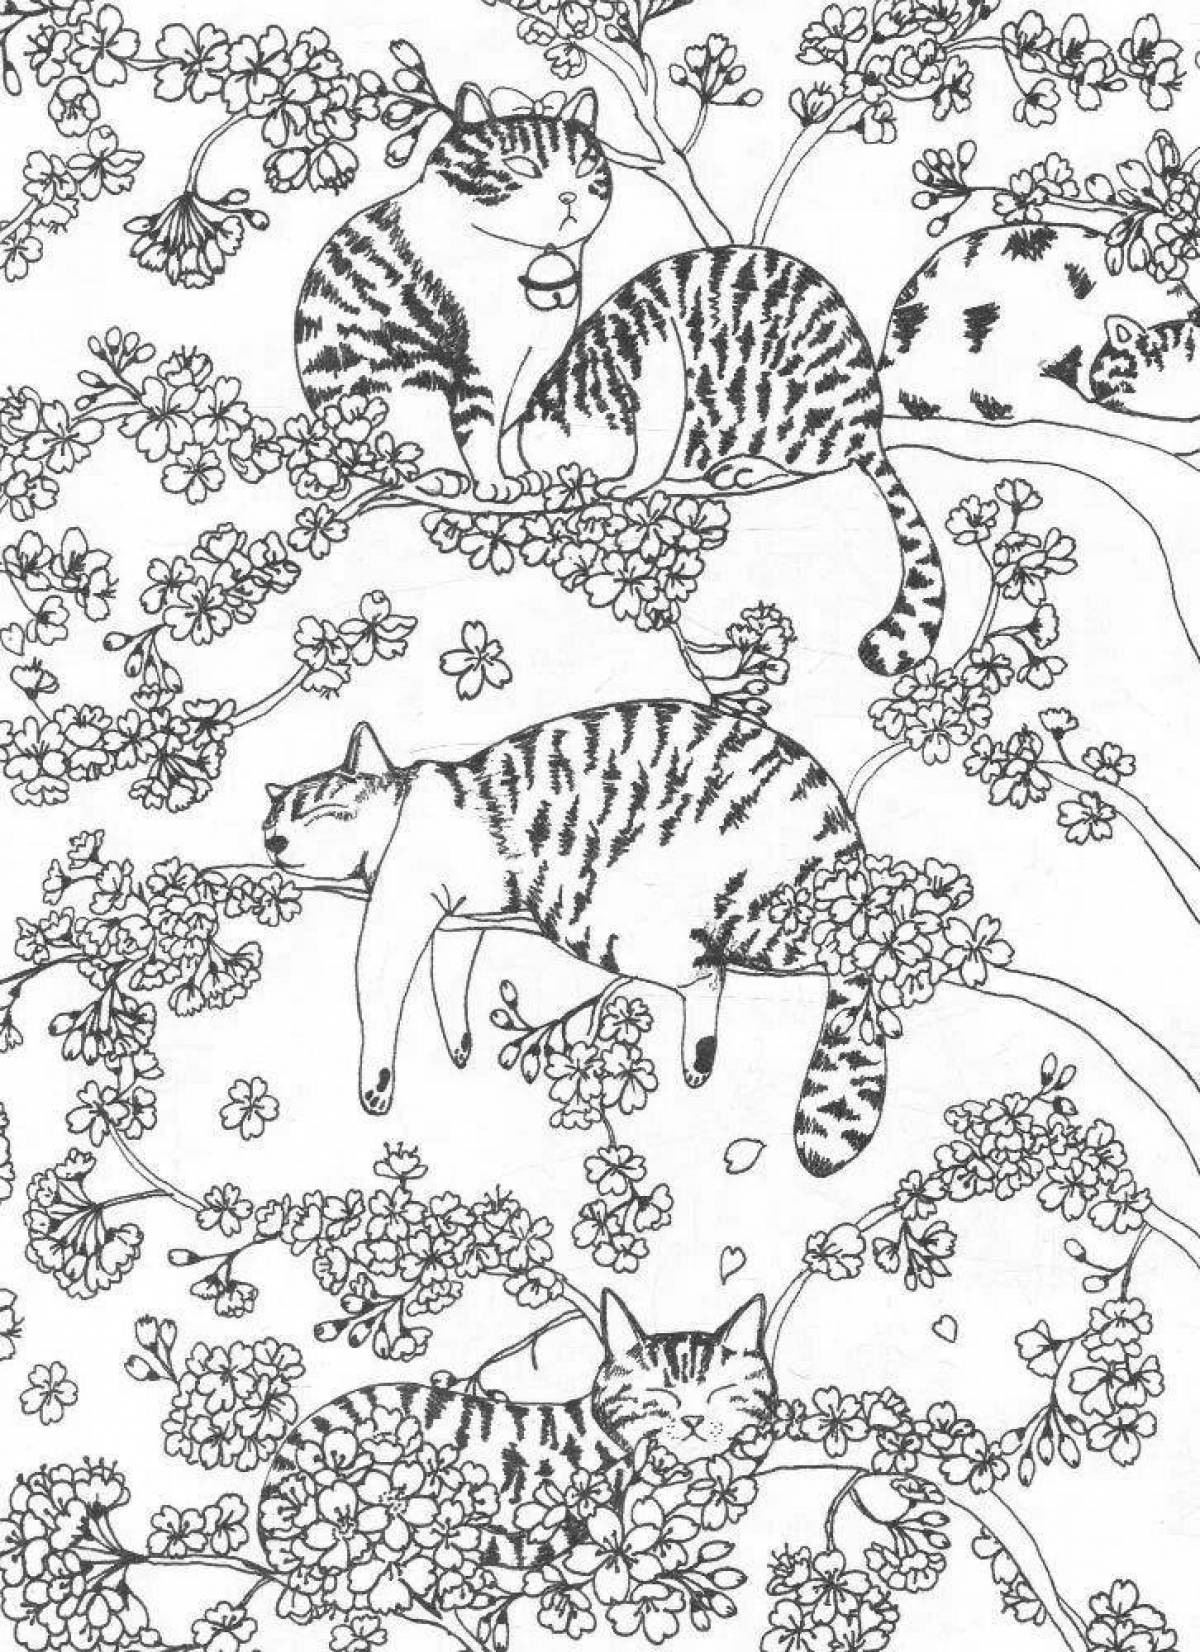 Fairy million cats coloring page